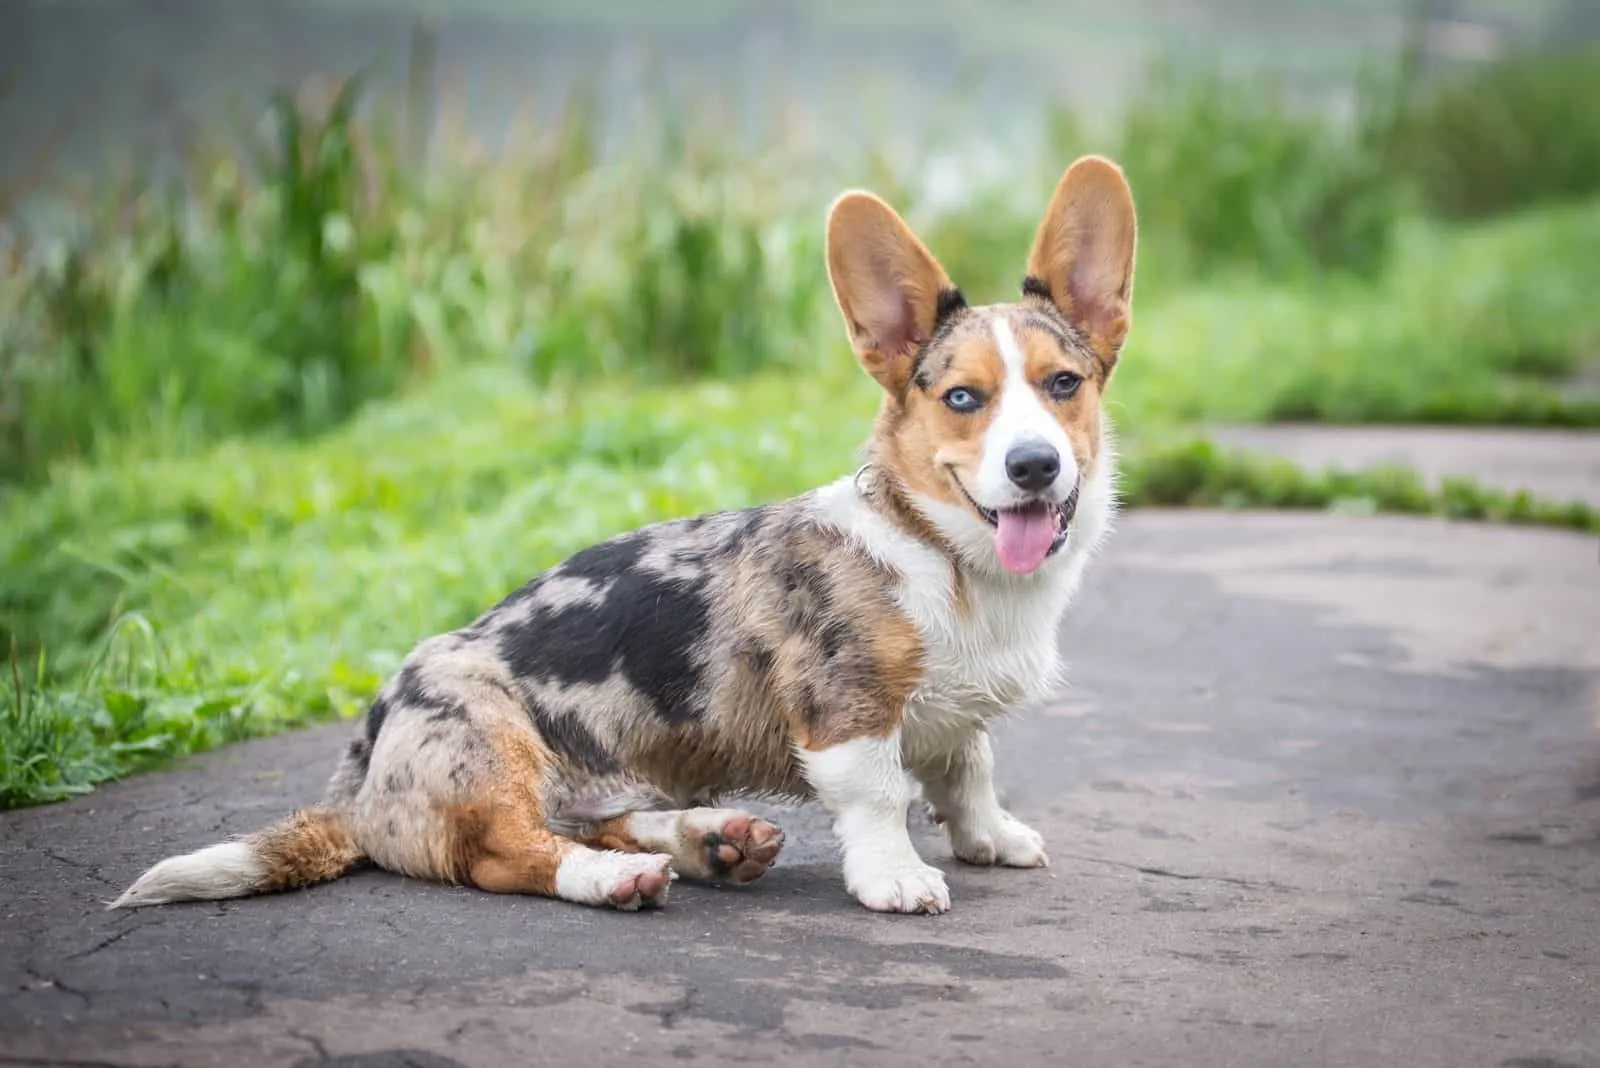 Cardigan Welsh Corgi puppy sitting on the road in summer